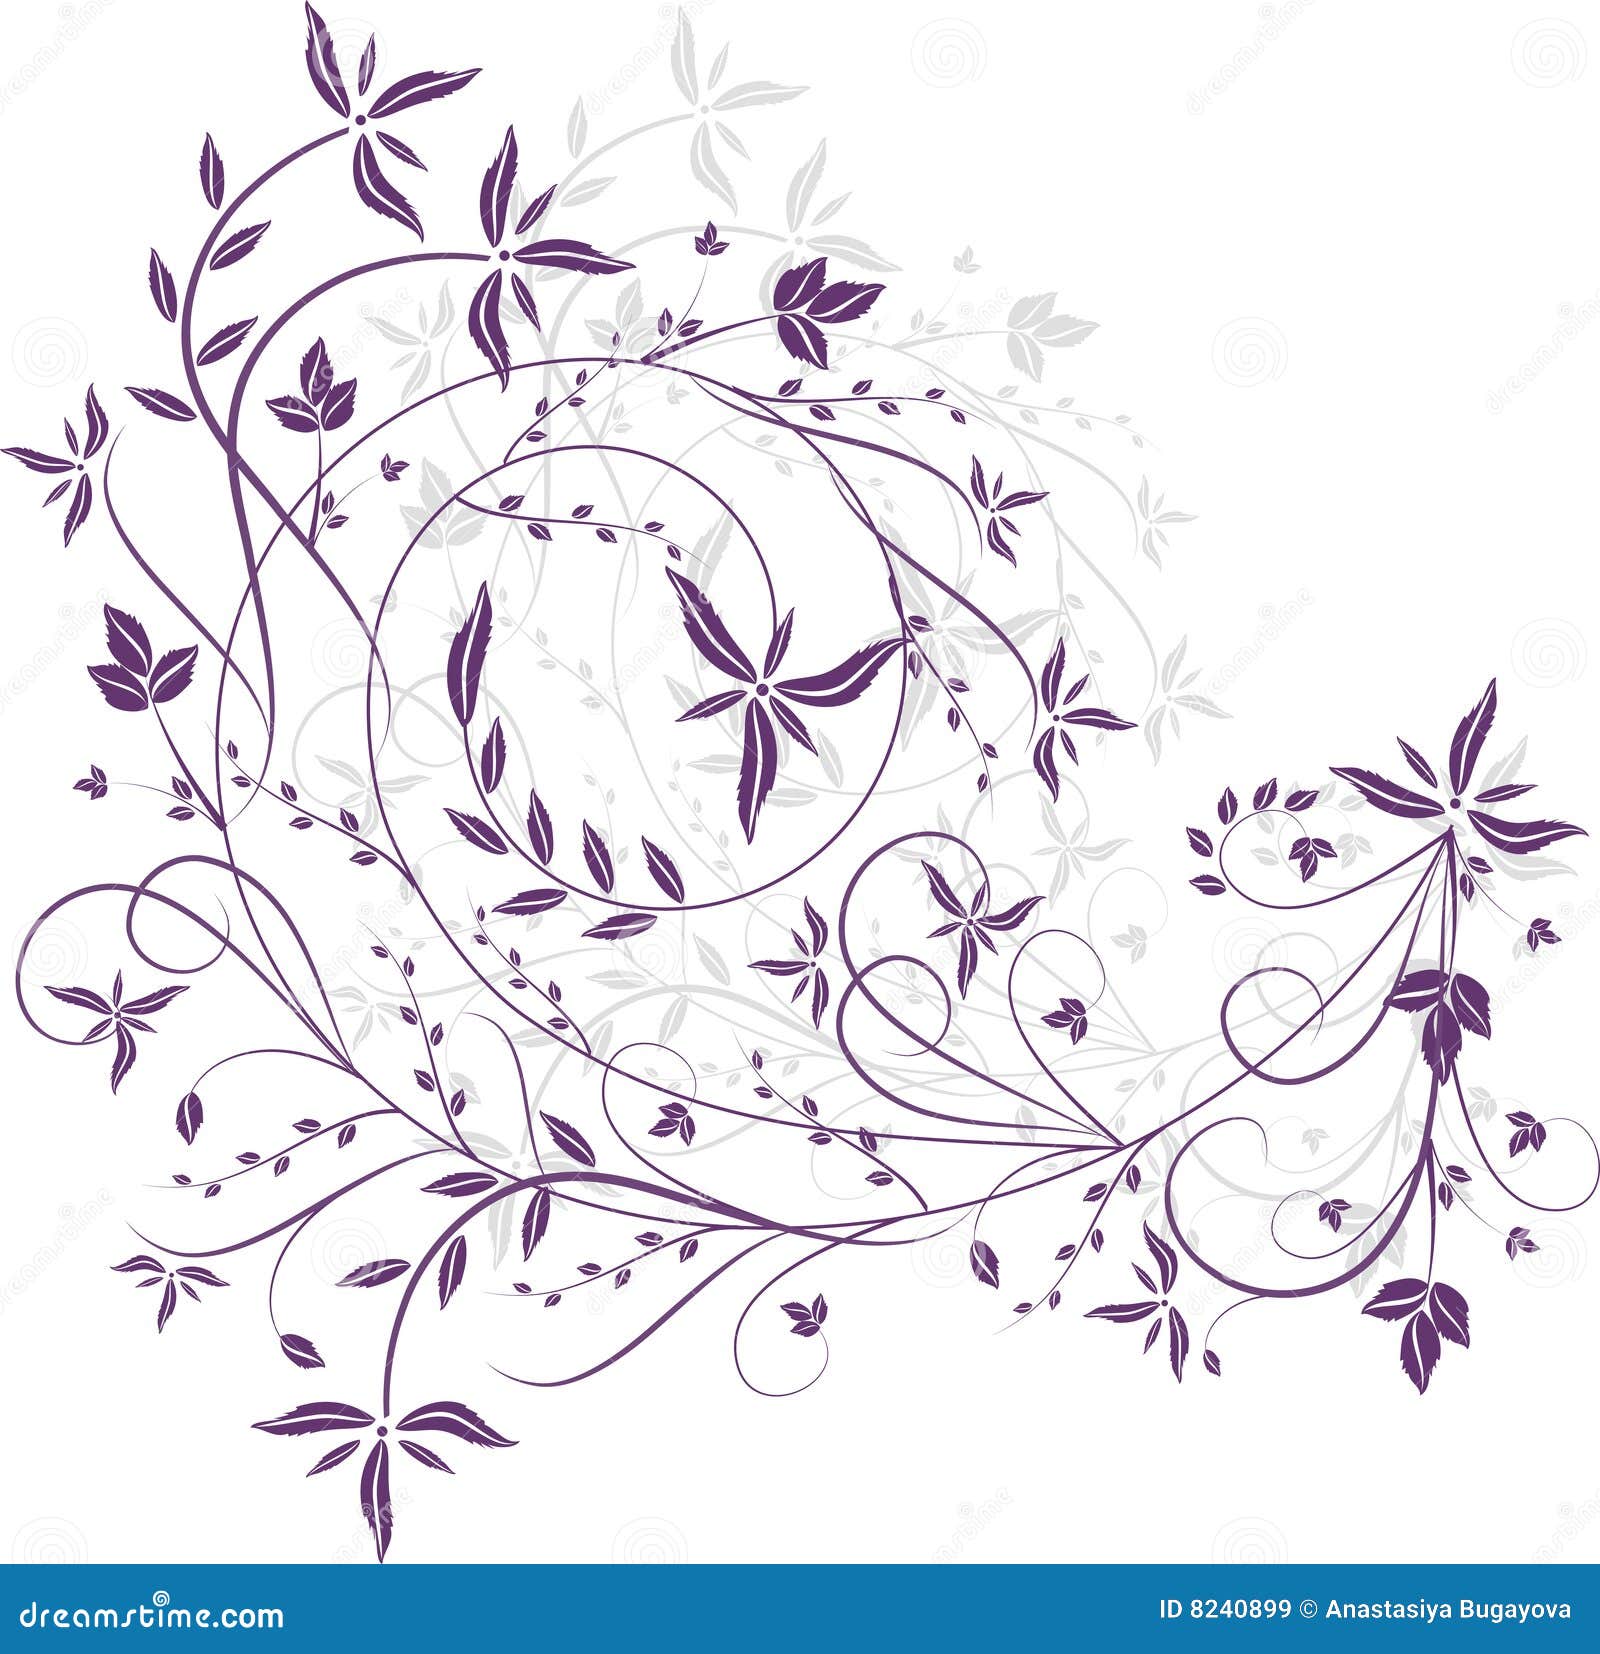 Violet floral pattern stock vector. Illustration of abstract - 8240899